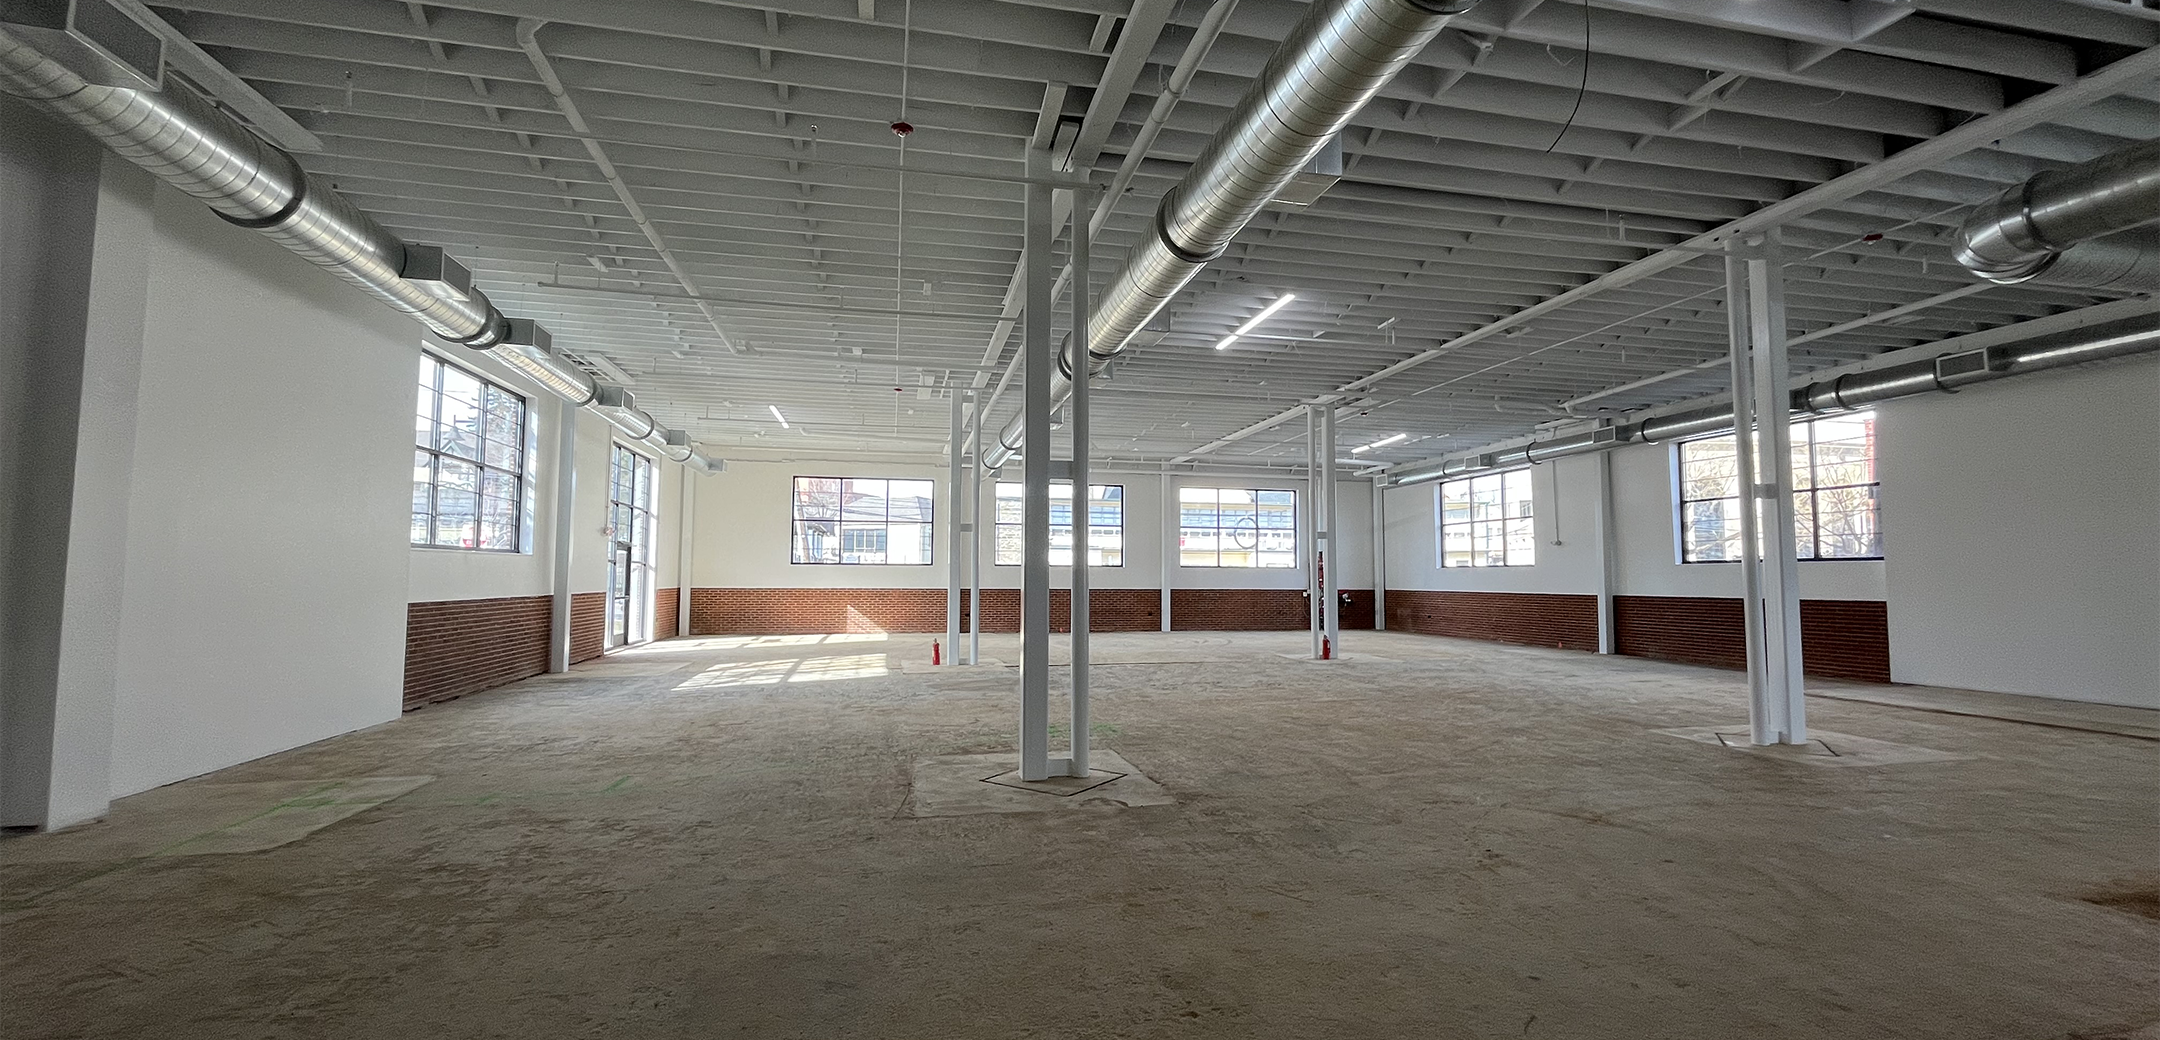 An interior view of the 108 Wayne Ave with tall industrial ceiling, support pillars, white walls and concrete flooring,